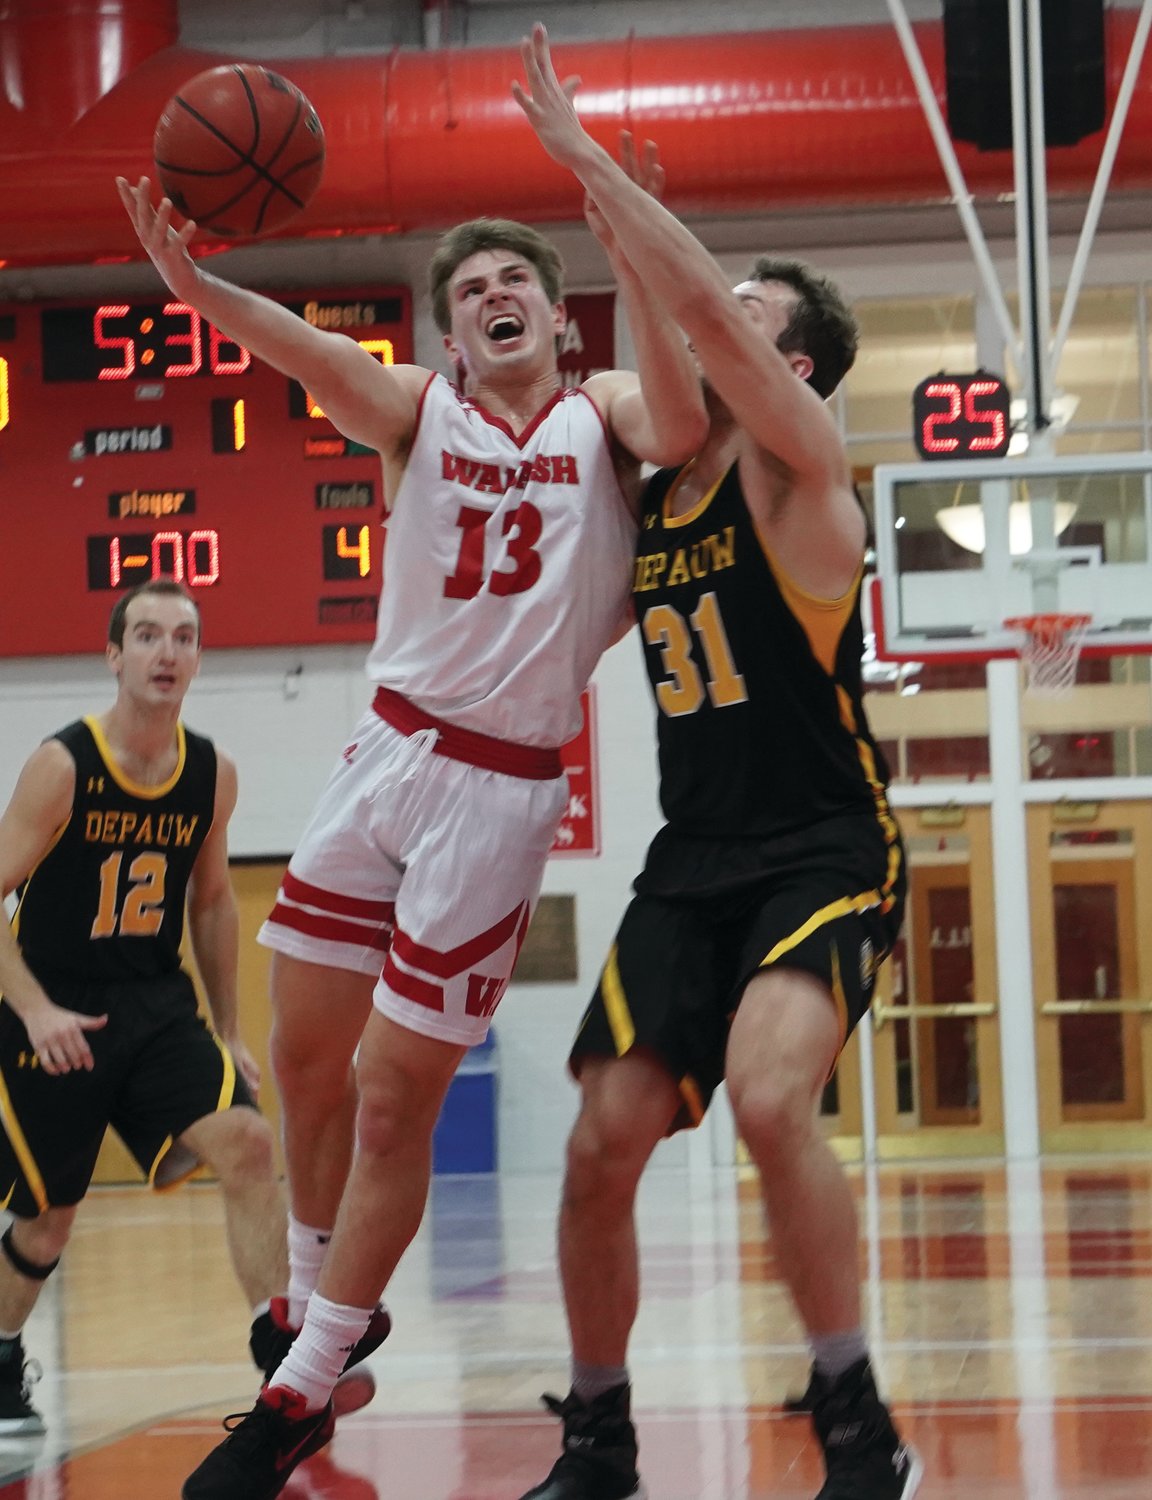 Wabash's Tyler Watson led the Little Giants with 27 points in an 84-70 loss to DePauw on Thursday.